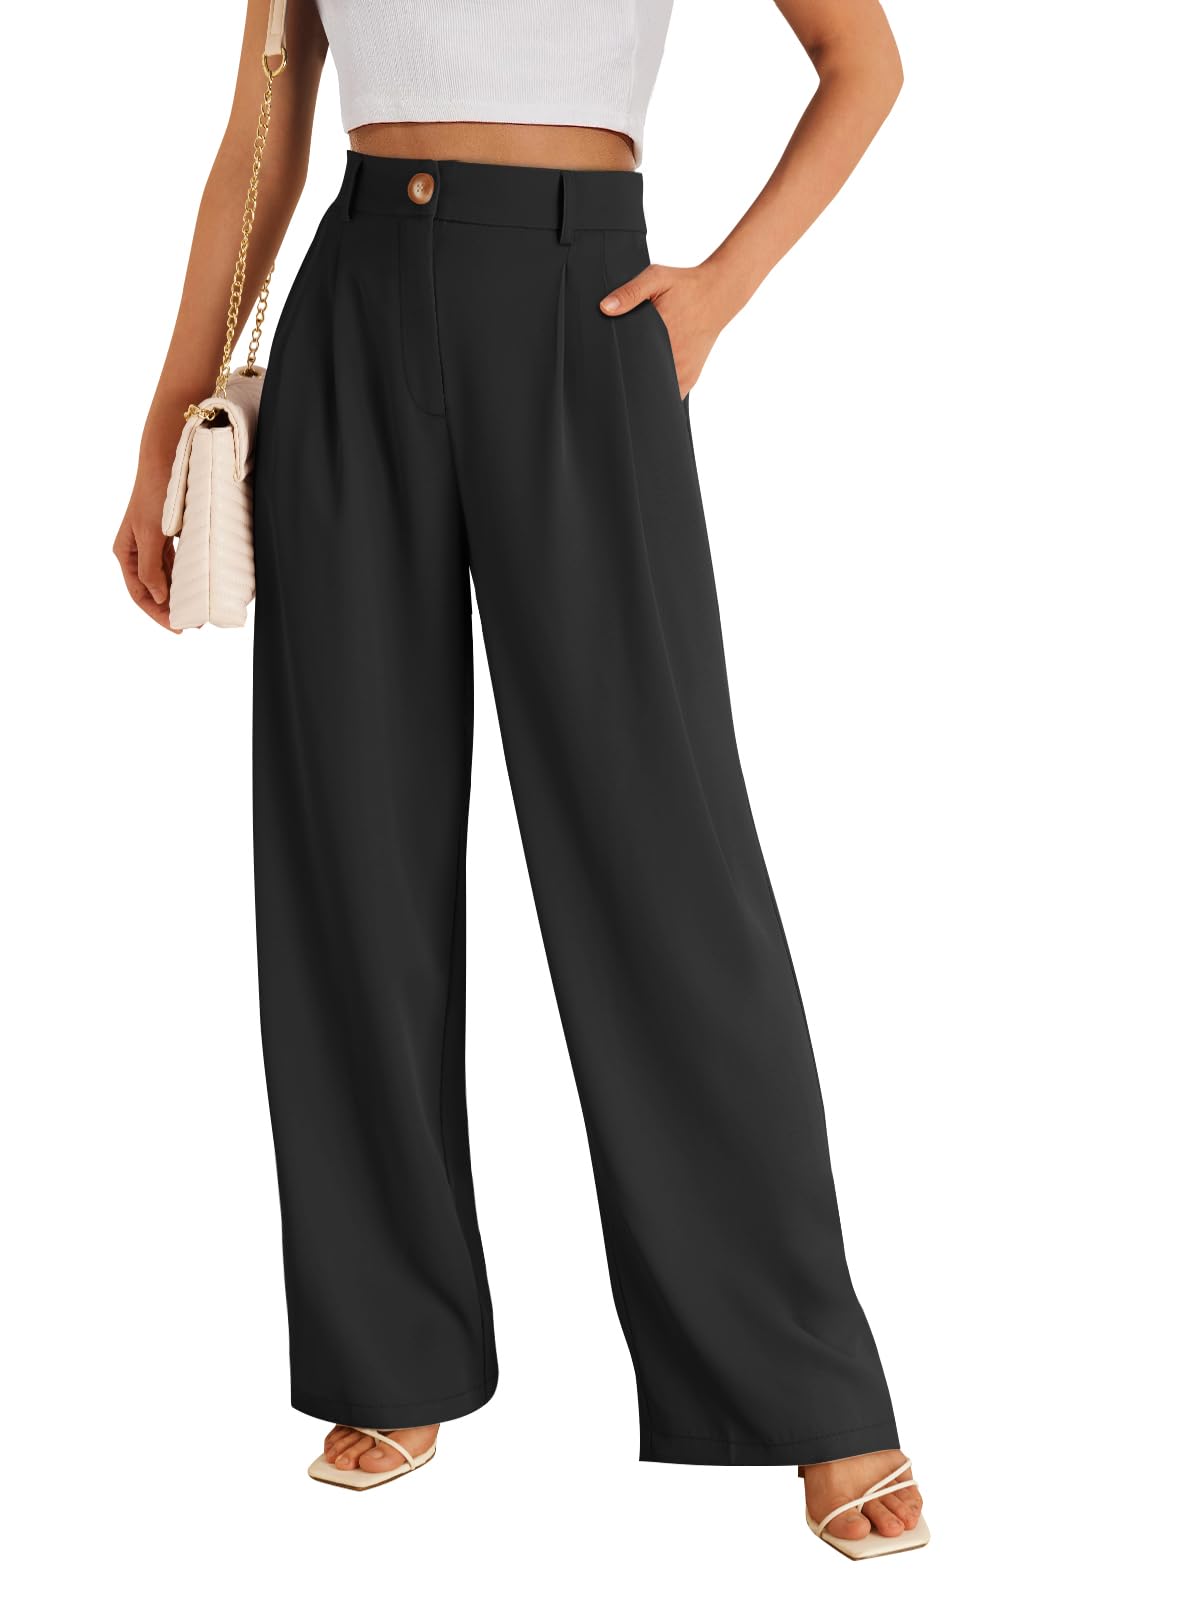 Wide Leg Dress Pants Women's High Waisted Business Casual Trousers VALOZENC Black Small 